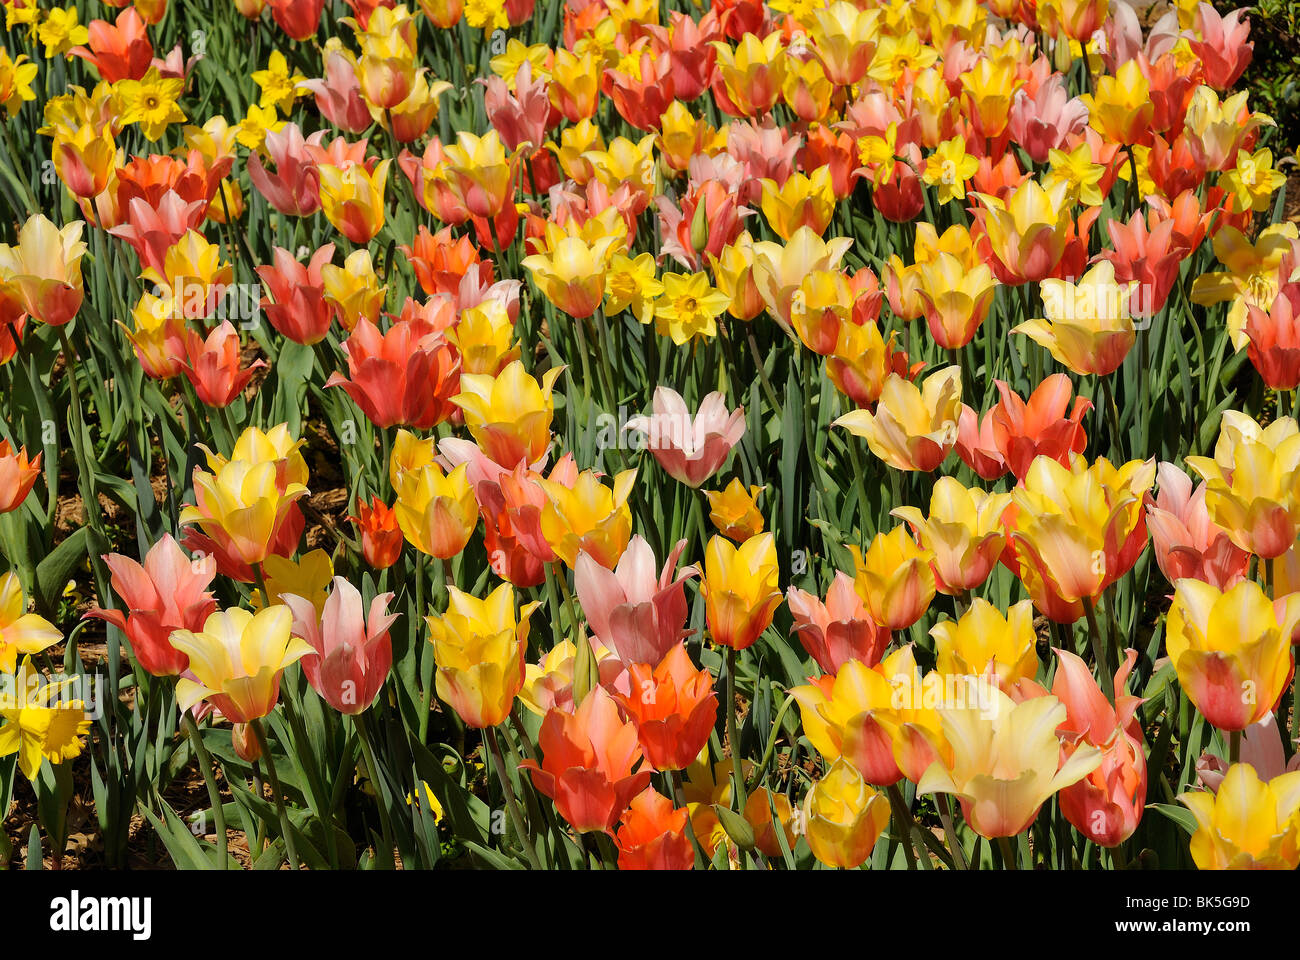 Flower bed of tulips in the Dallas Arboretum Park, Texas Stock Photo